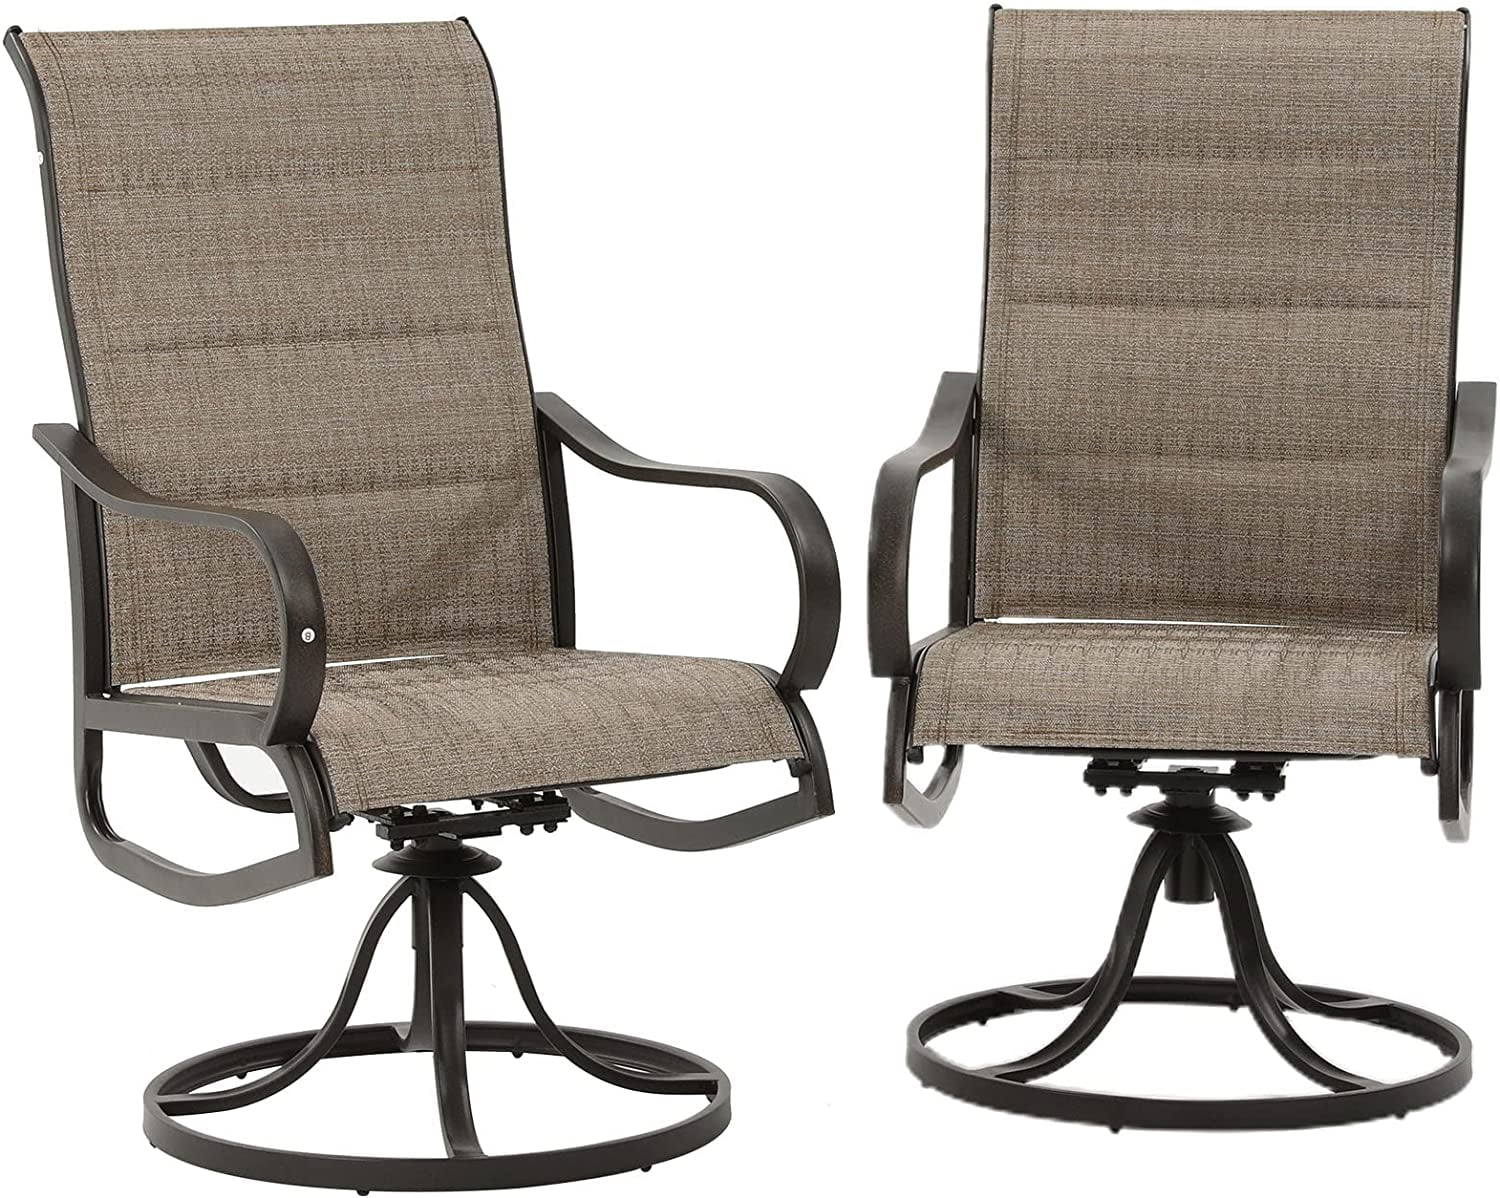 Amopatio Patio Swivel Chairs Set of 2, High Back Outdoor Dining Chair ...